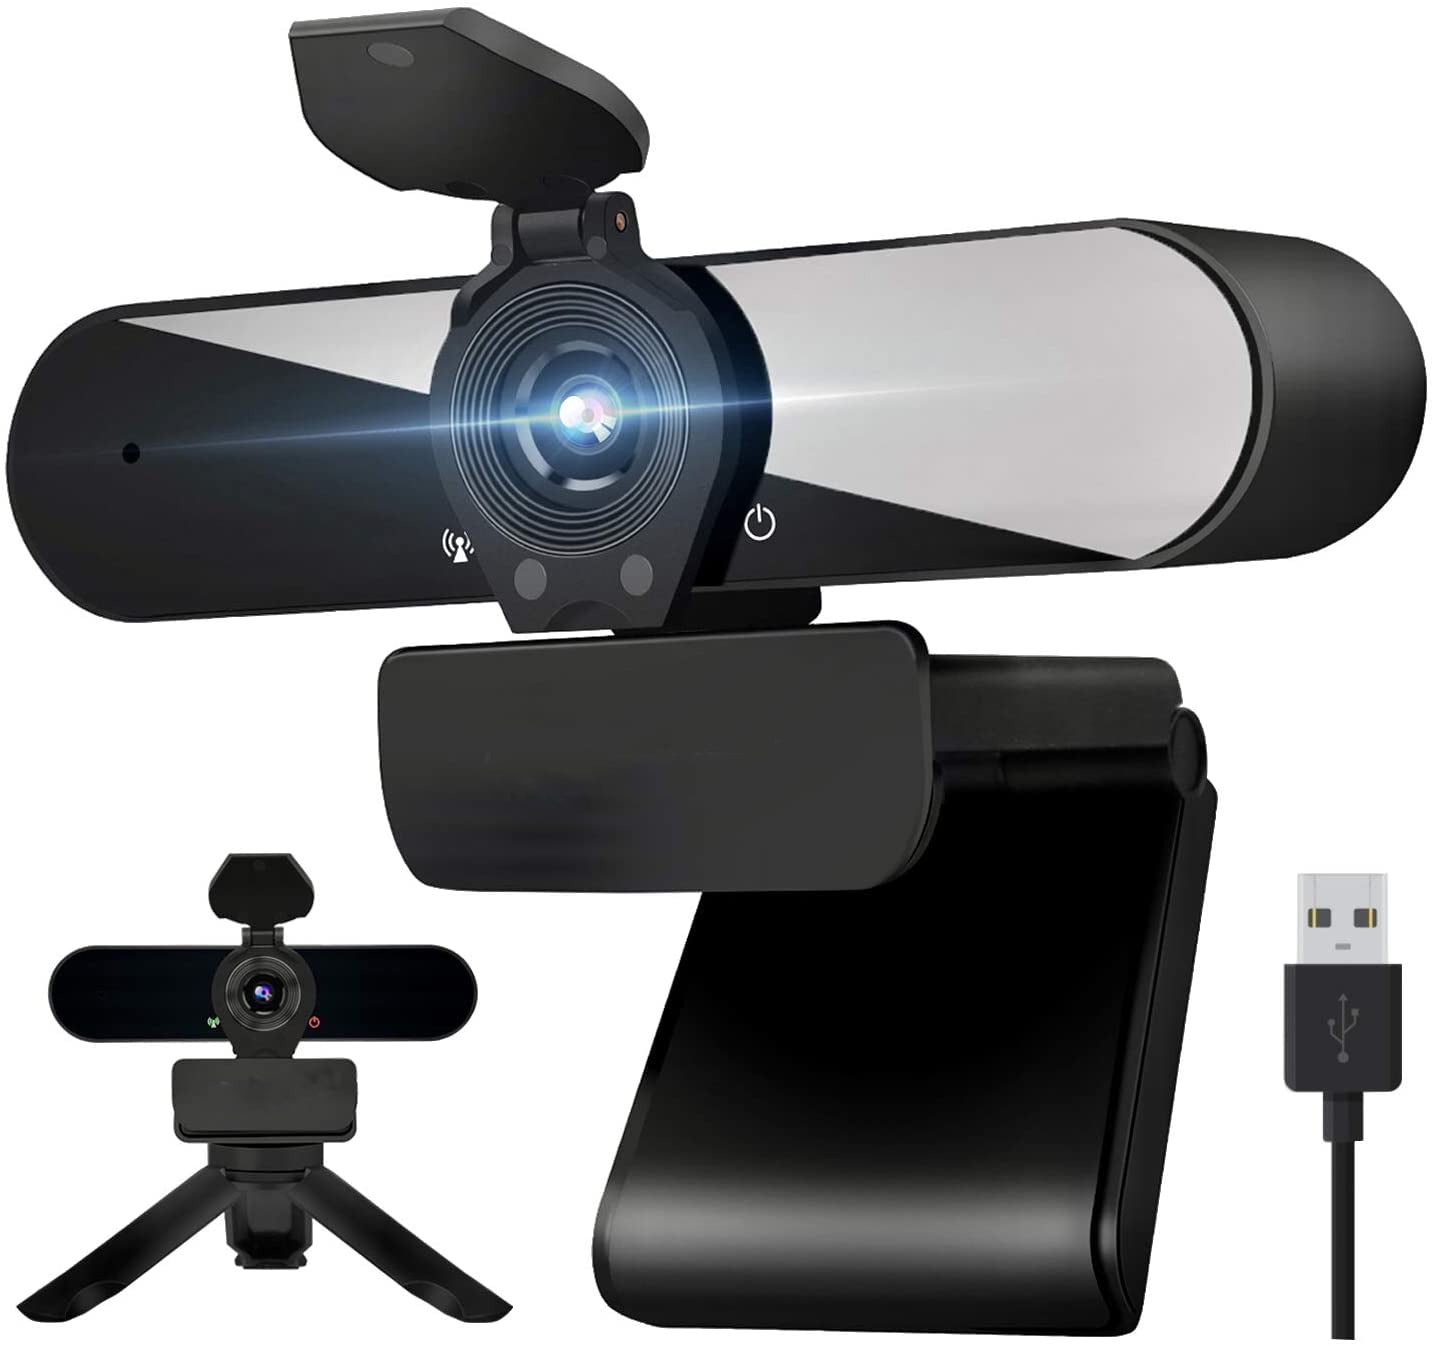 Skype Video Calling Full HD 2K Webcam with Microphone HD Autofocus Web Camera with Privacy Cover Plug and Play USB webcam for Youtube Studying Tripod Conference